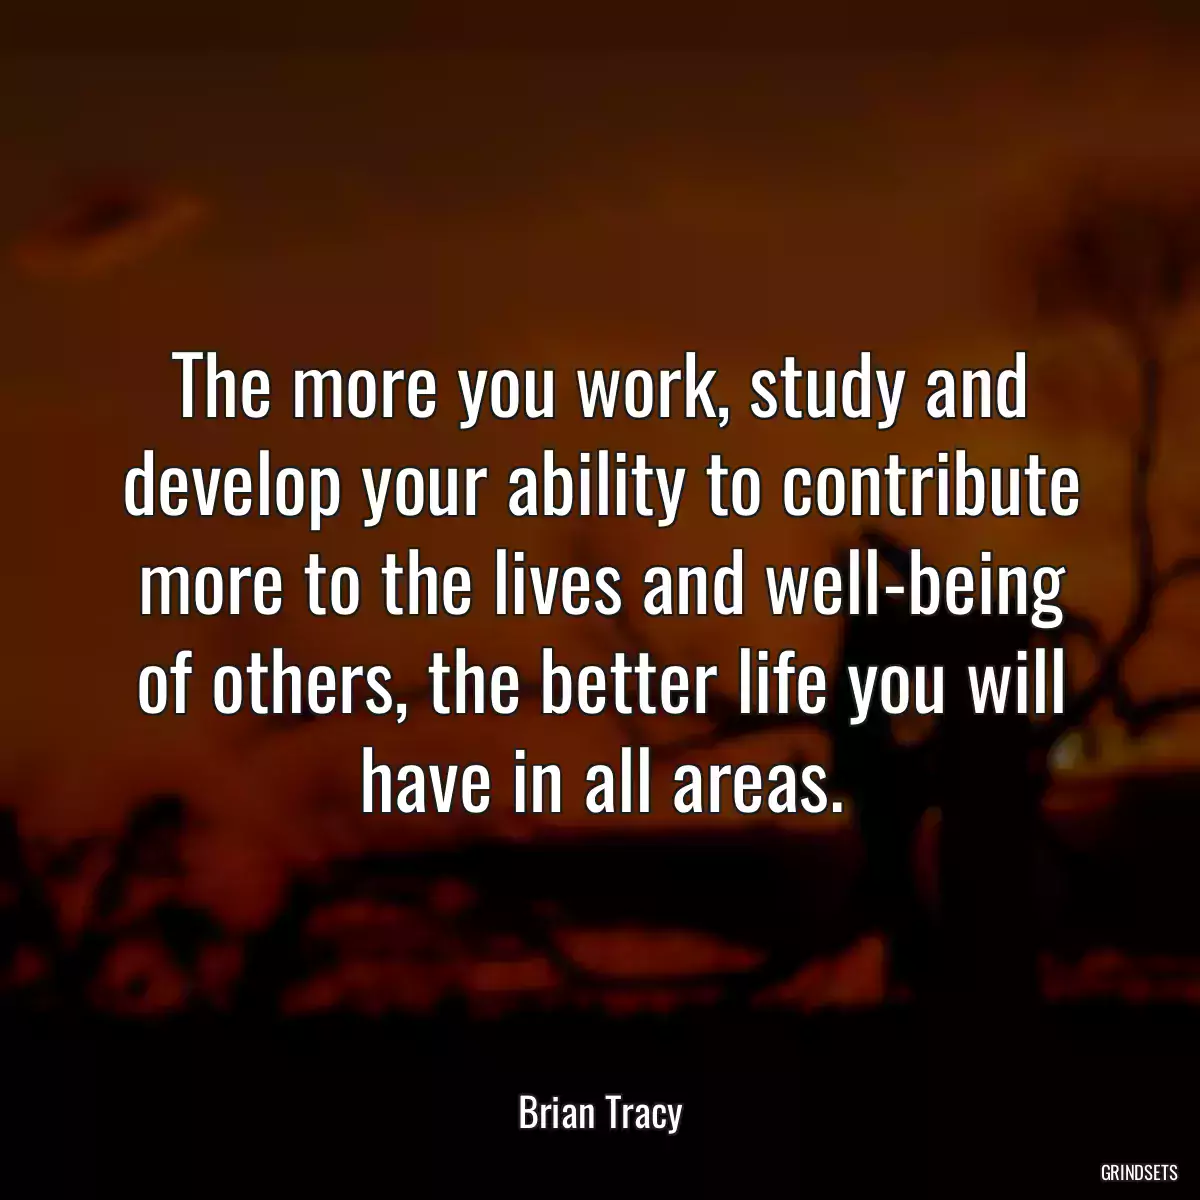 The more you work, study and develop your ability to contribute more to the lives and well-being of others, the better life you will have in all areas.